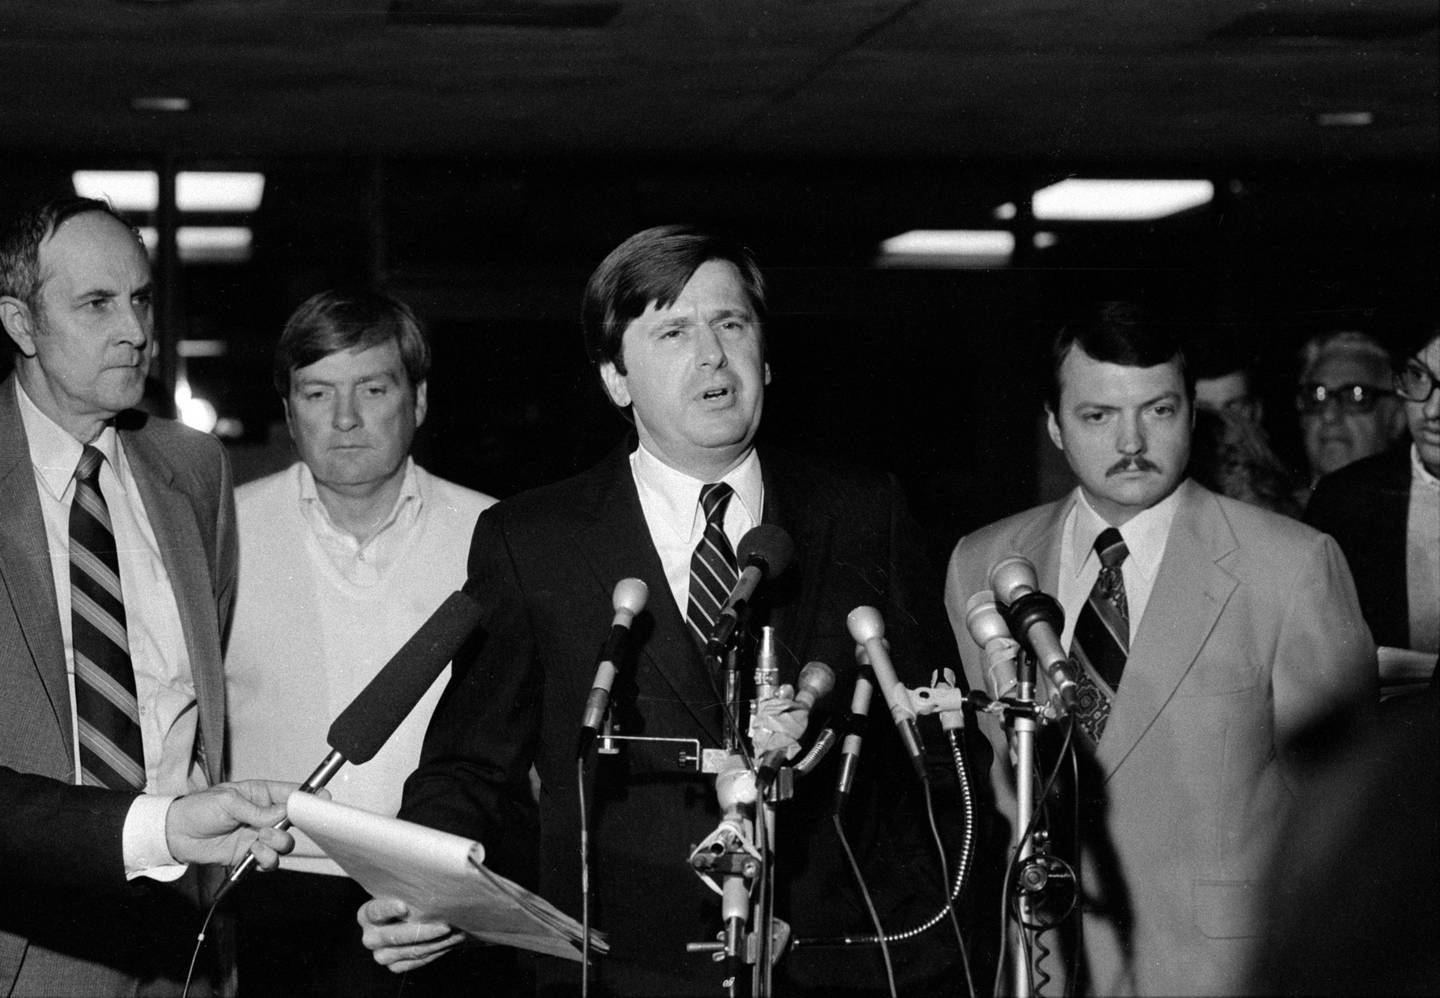 Ty Fahner, head of the Tylenol task force, speaks at a news conference on Oct. 14, 1982. At right is Kansas City police Sgt. David Barton, who had investigated James Lewis in Missouri.